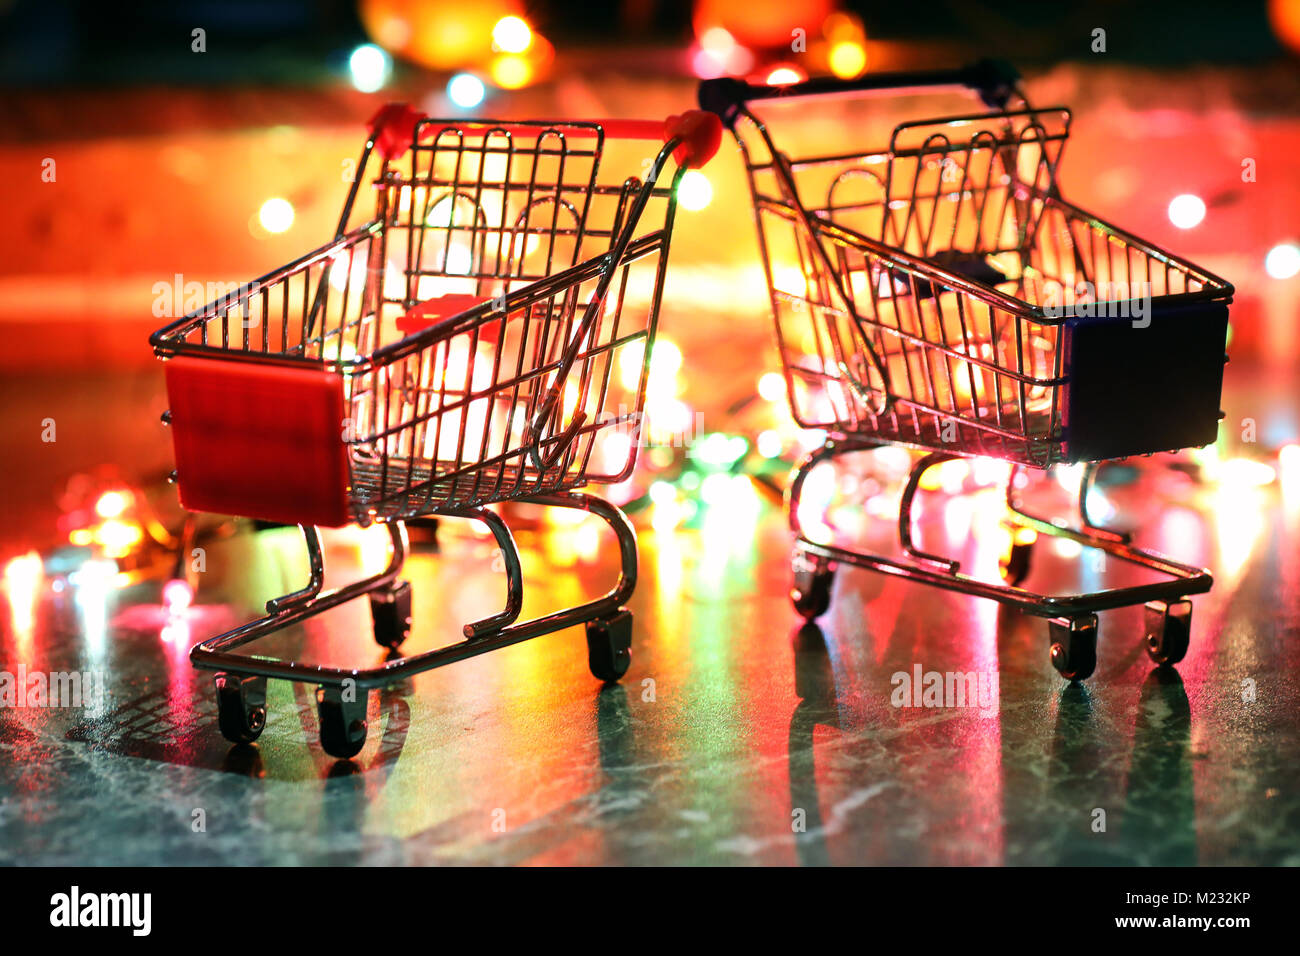 metal supermarket small cart on a background colored lights Stock Photo